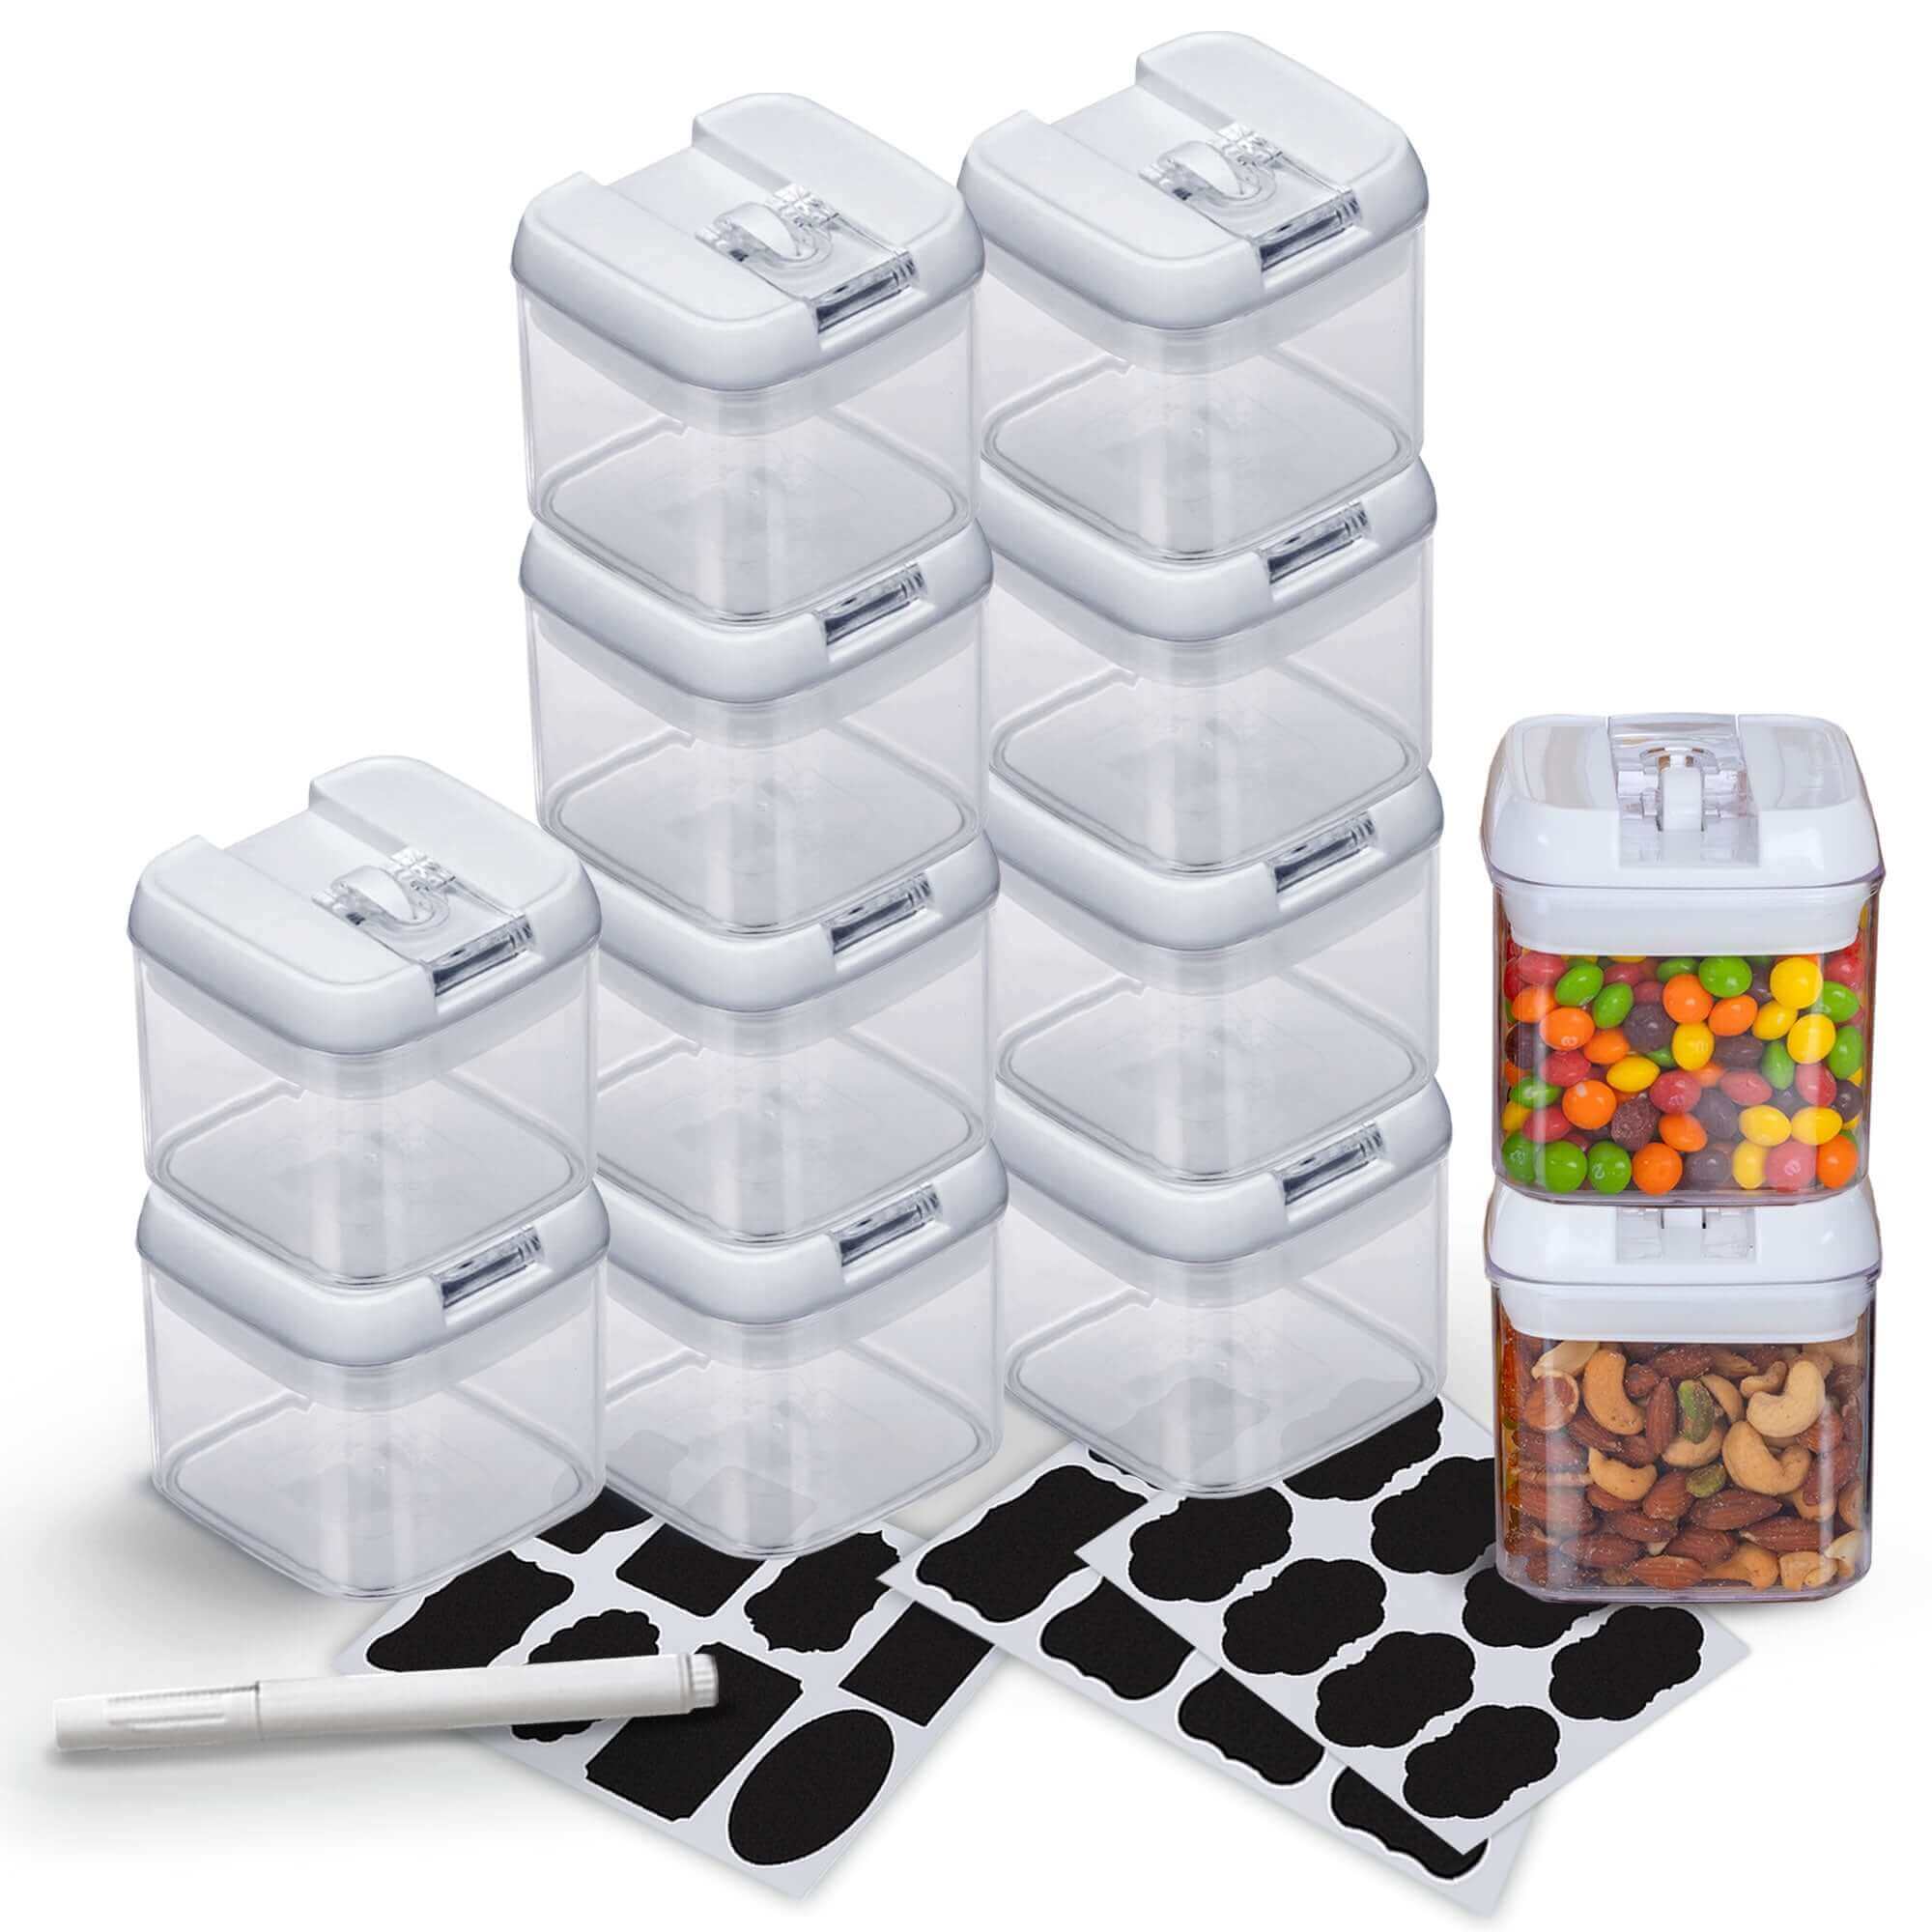 https://cdn.shopify.com/s/files/1/2091/6511/products/cheer-collection-one-size-airtight-food-storage-containers-set-of-12-identical-17-oz-pantry-organizer-bins-plus-marker-and-labels-347502.jpg?v=1672310552